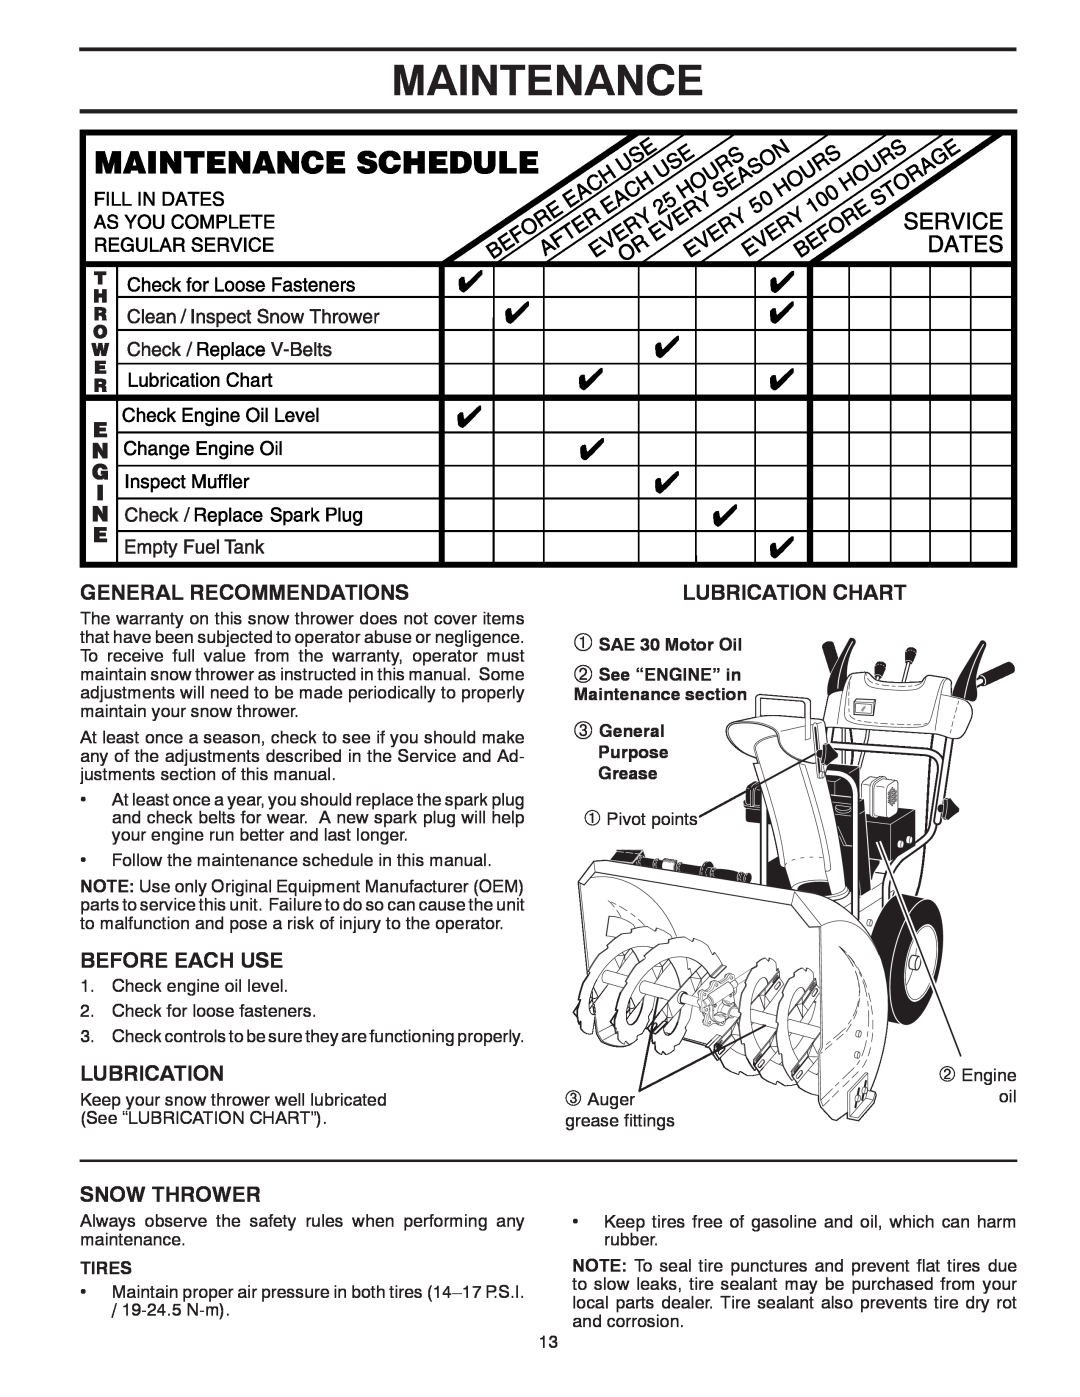 Poulan 421283 Maintenance, General Recommendations, Before Each Use, Snow Thrower, Lubrication Chart, Purpose Grease 